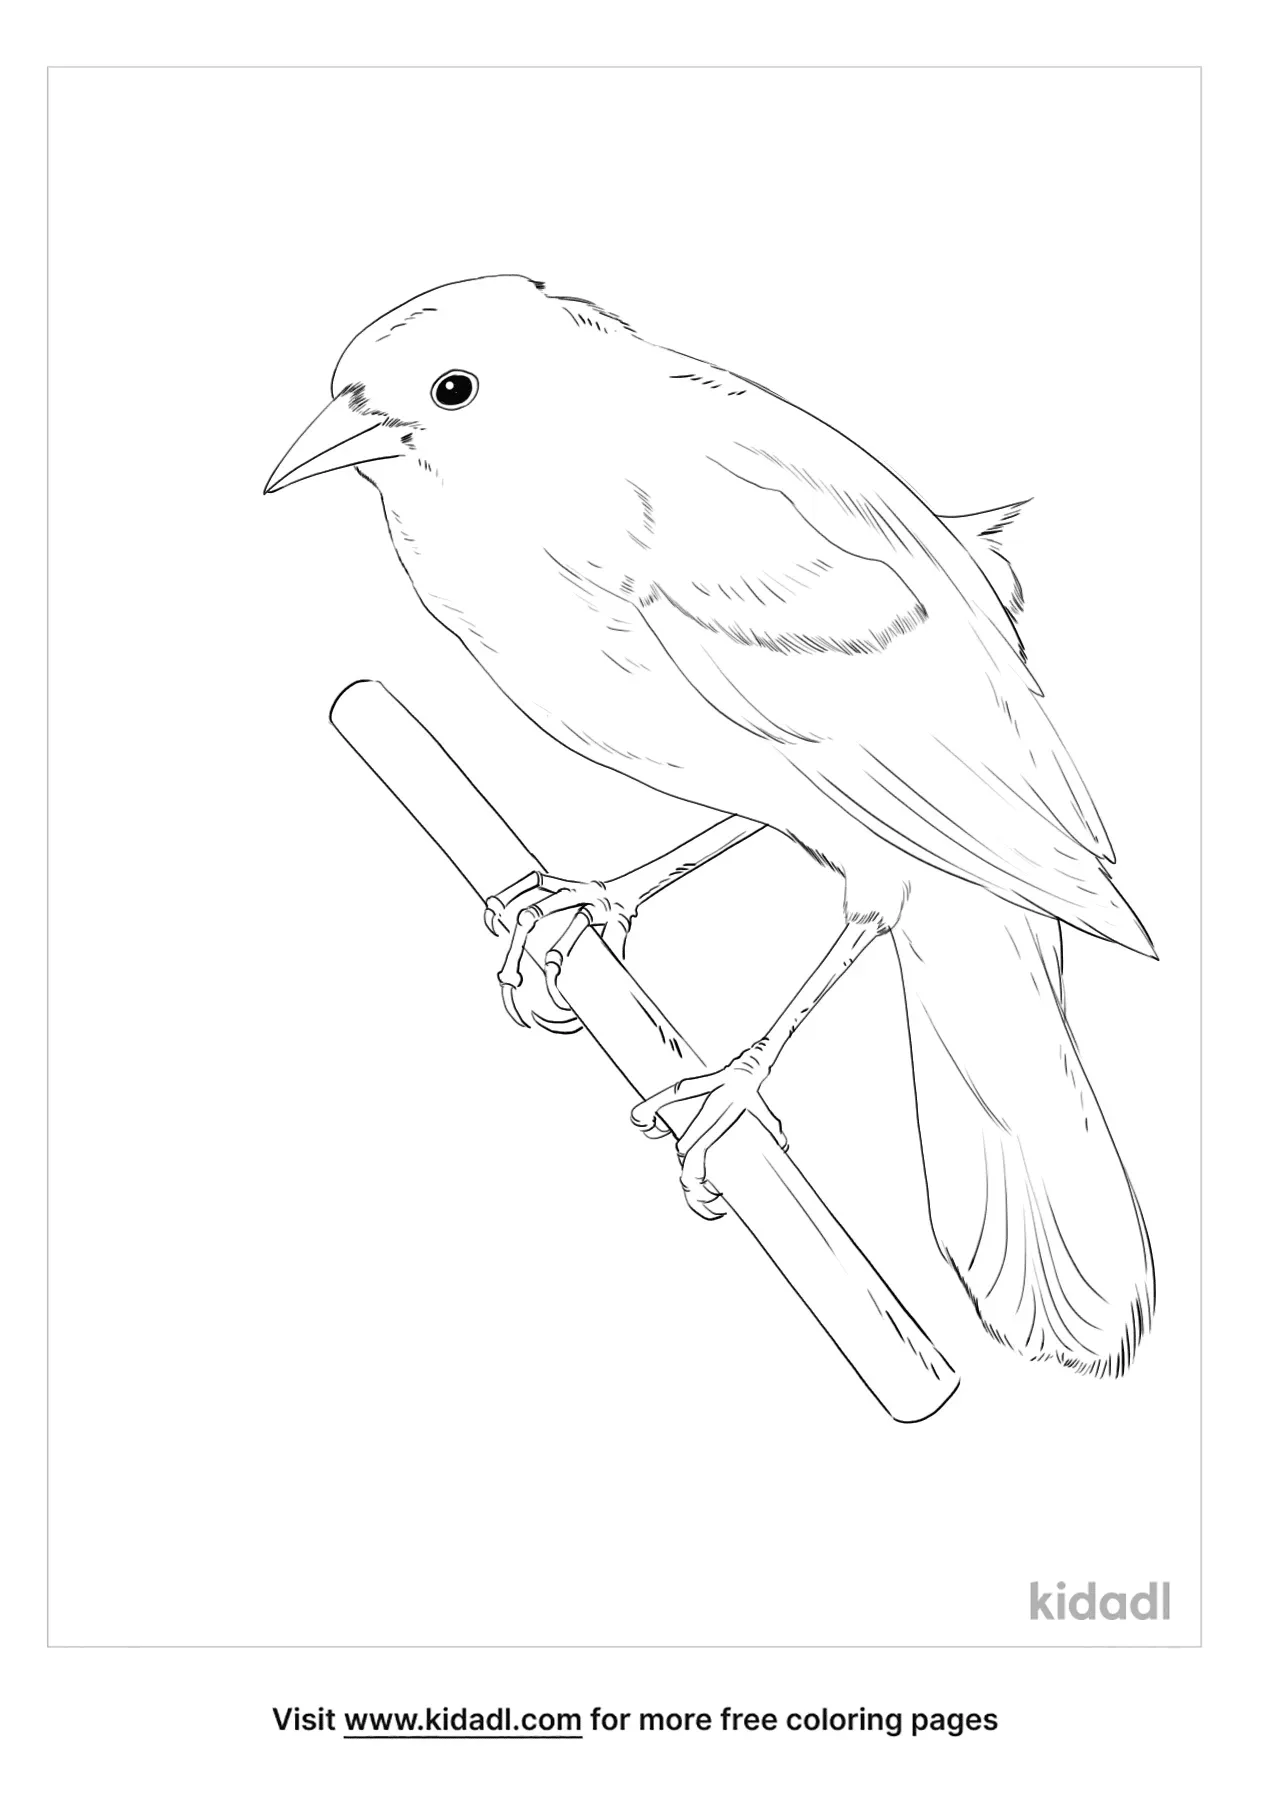 Black-Capped Lory Coloring Page | Free Birds Coloring Page | Kidadl